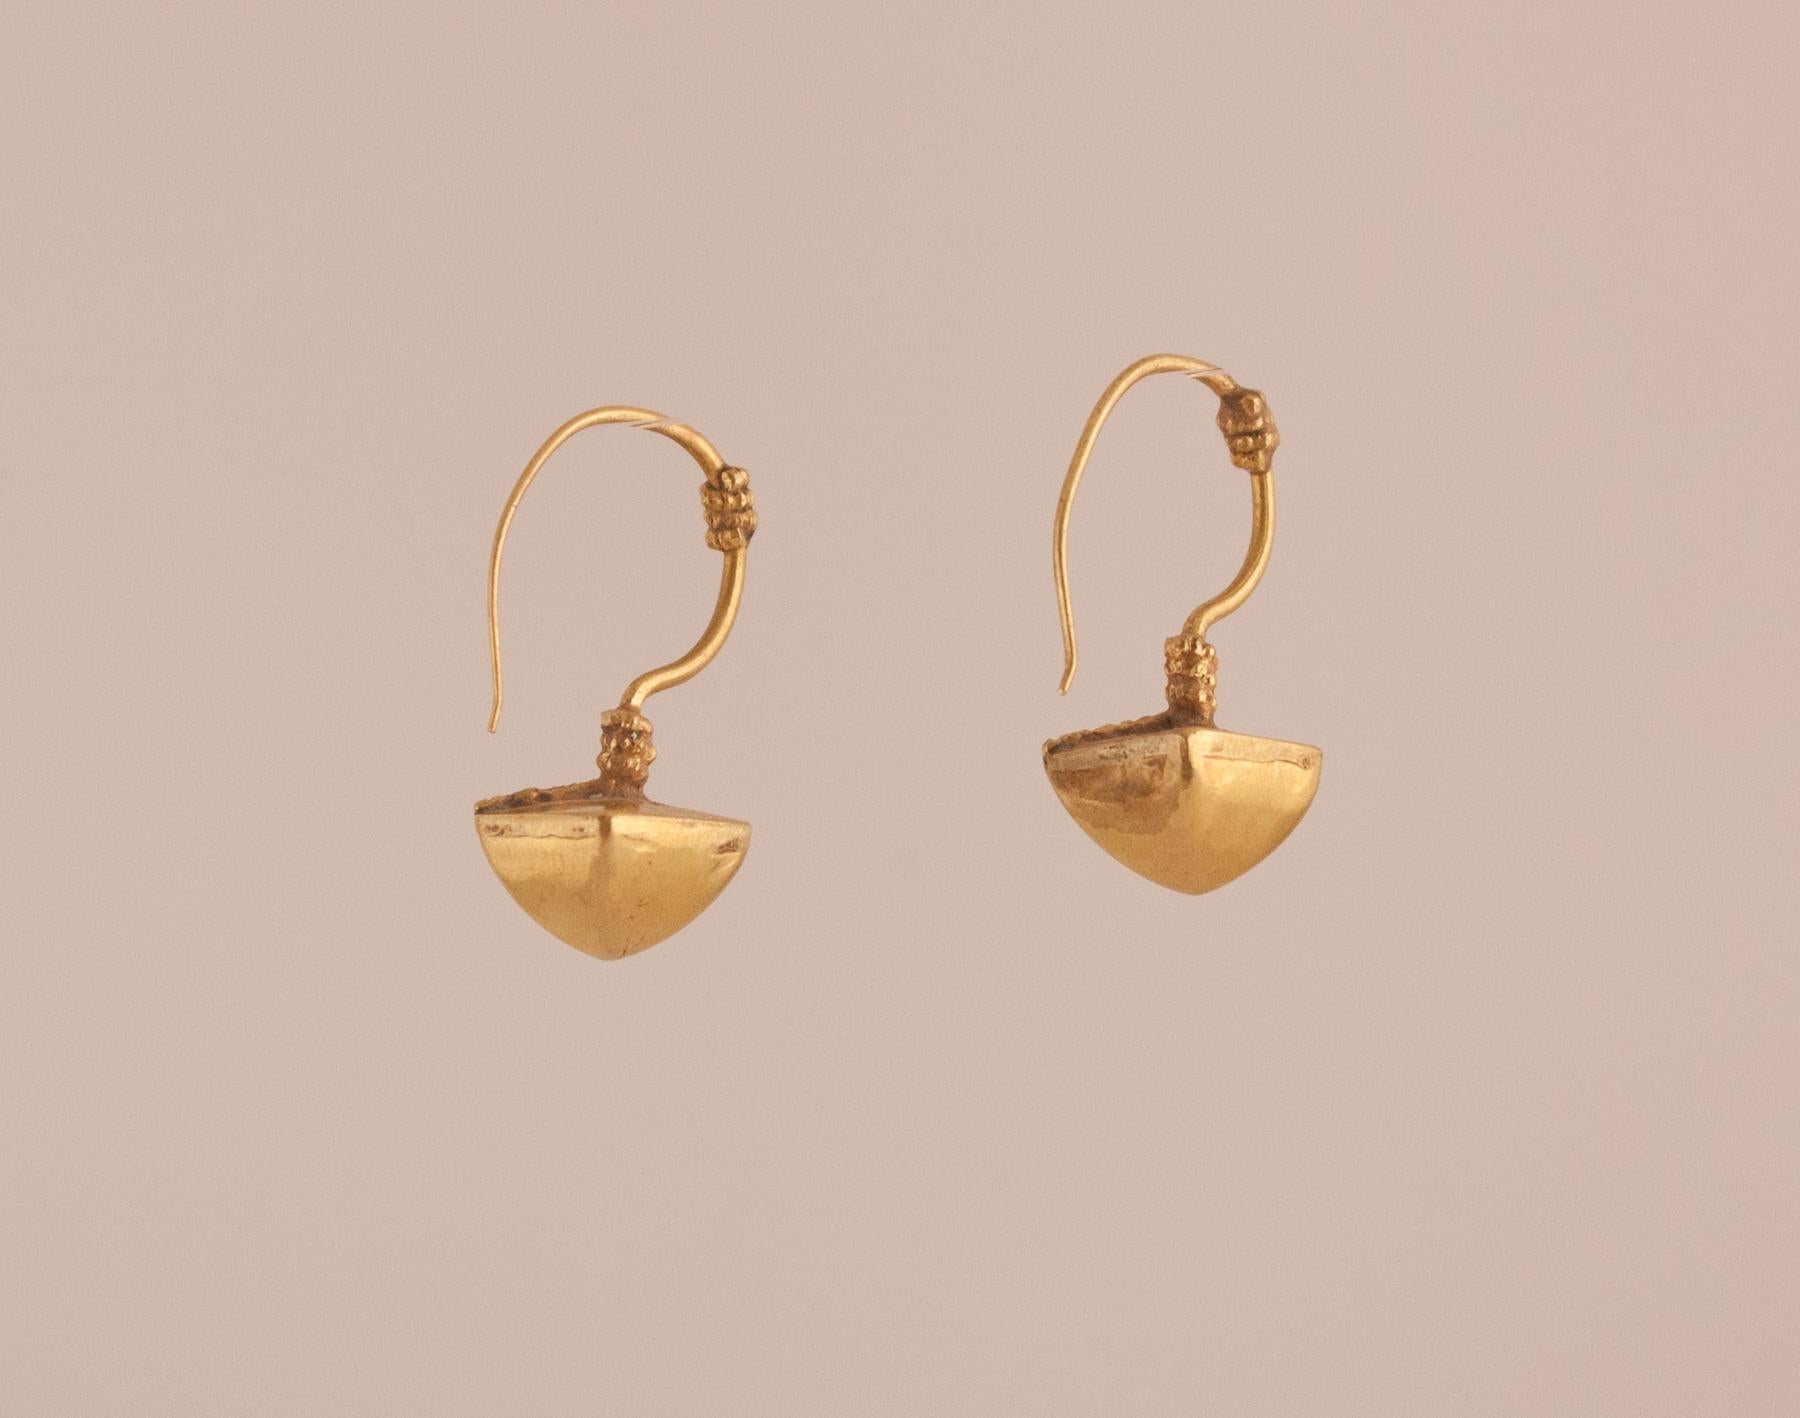 A pair of 18 karat gold pyramid-shaped earrings handcrafted in India, circa 1950. Tasteful granulation work on the fixed wire and flat top add interest to these three-dimensional tribal earrings.
Gold: 7.3 grams 